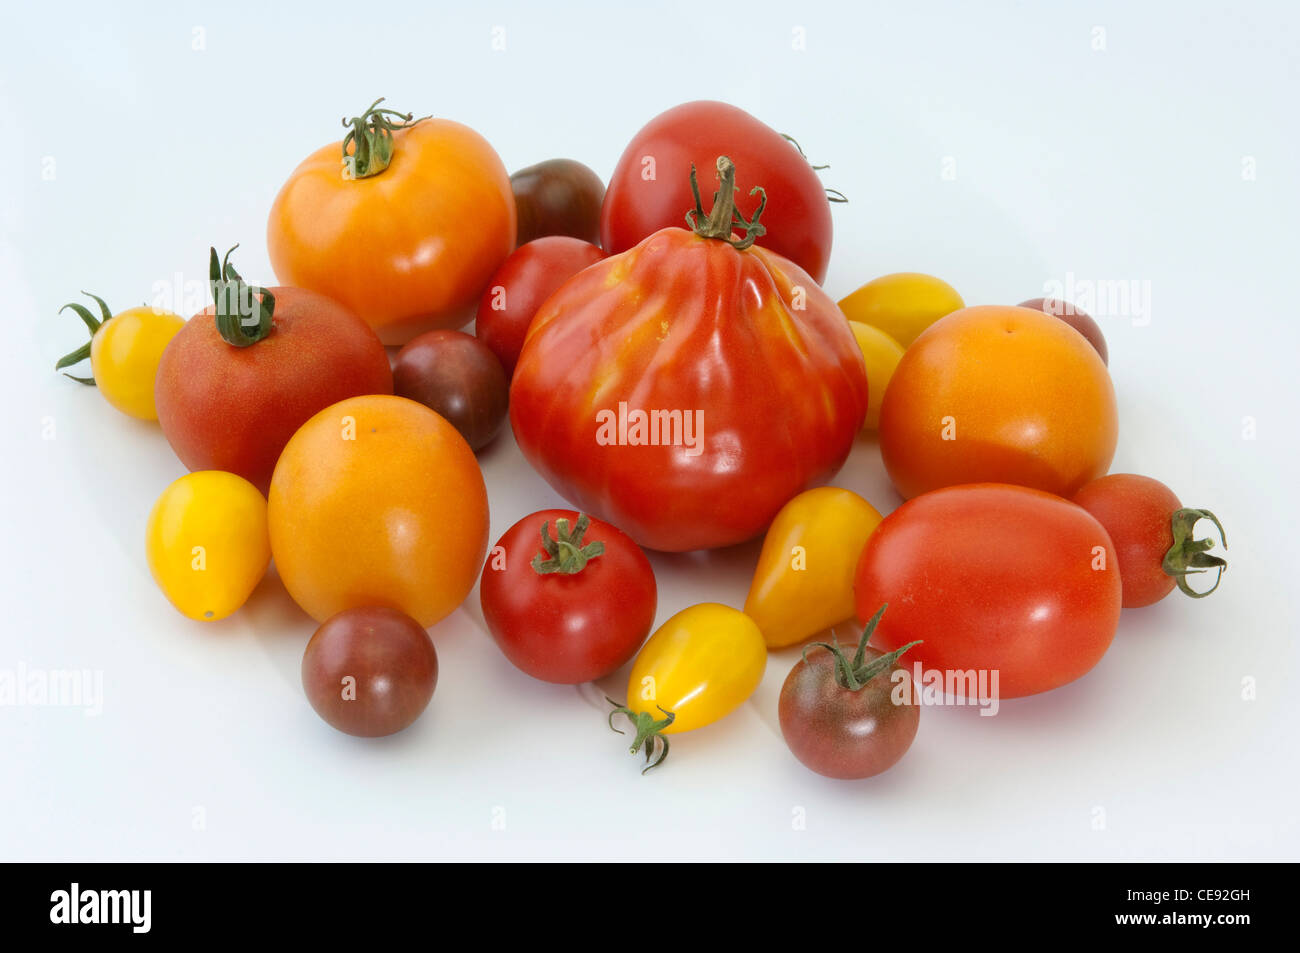 Tomato (Lycopersicon esculentum), fruit of different varieties. Studio picture against a white background. Stock Photo